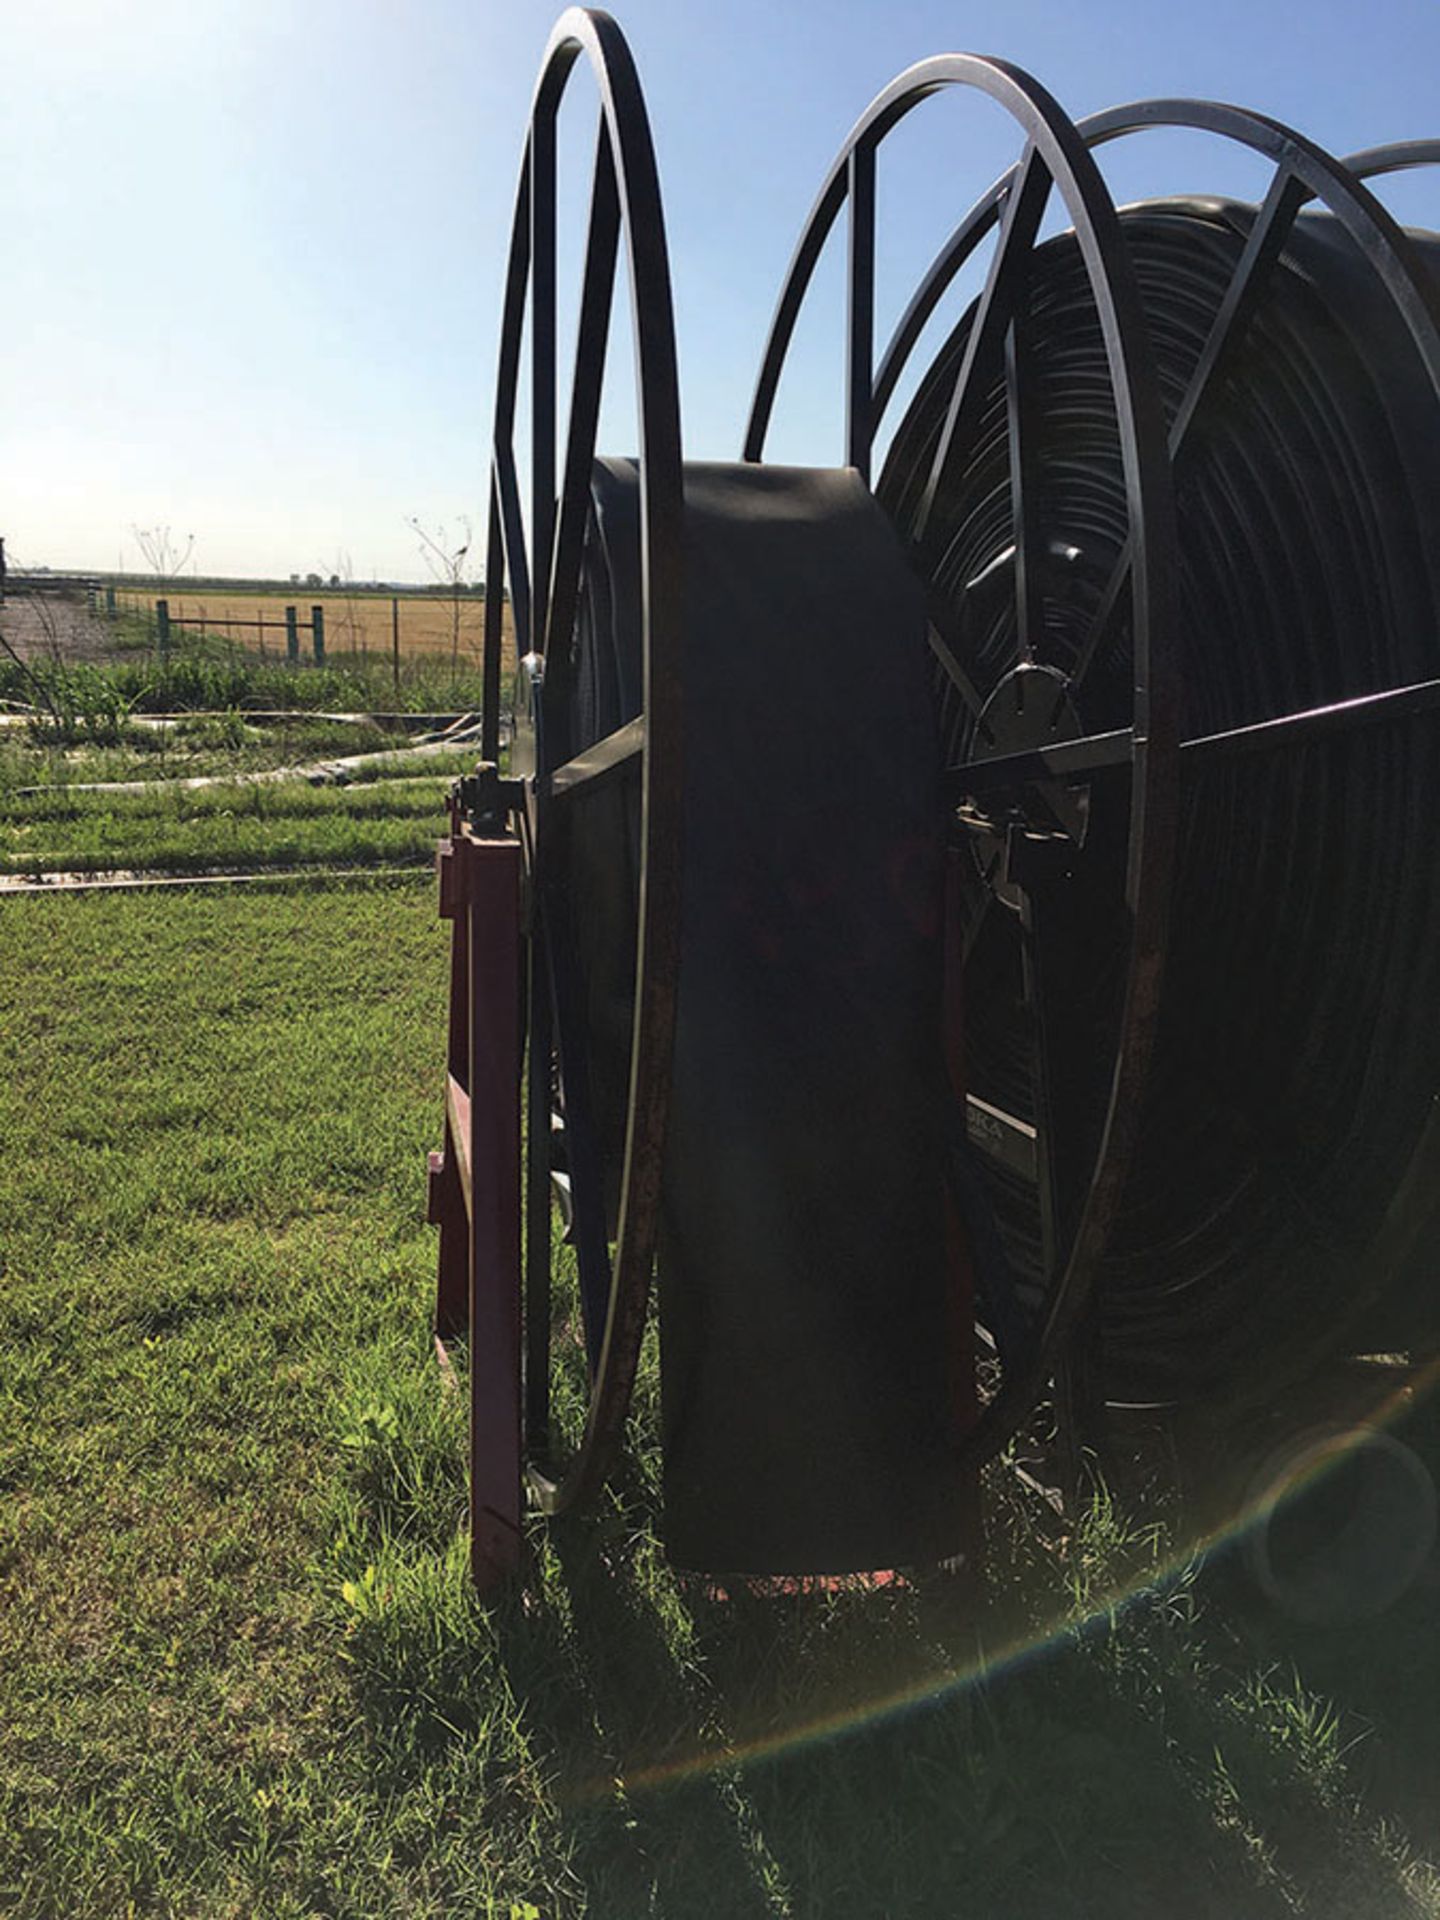 660ft. of 12in. LAY FLAT HOSE ON BAZOOKA HOSE REELS, EACH UNIT NUMBERED SEPARATELY WITH PAINT - Image 11 of 19